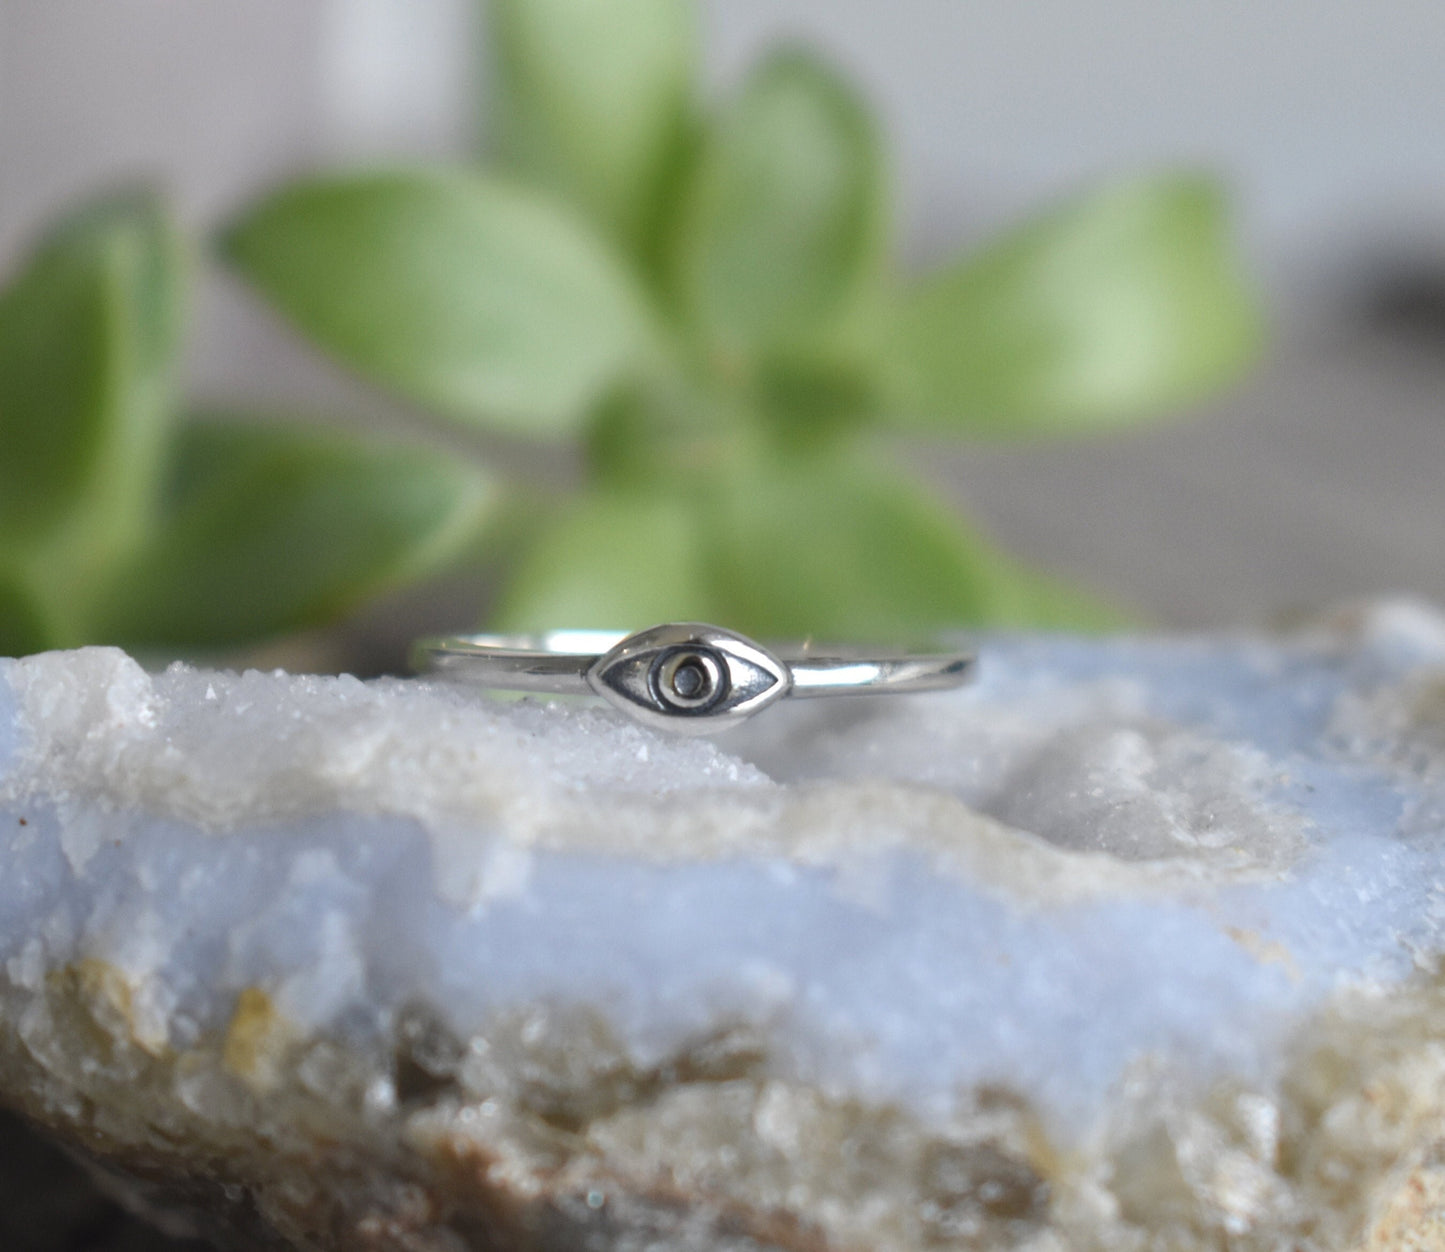 Evil Eye Ring- Silver Eye Ring, Witchy Jewelry, Fortune Telling- Silver Eye Ring